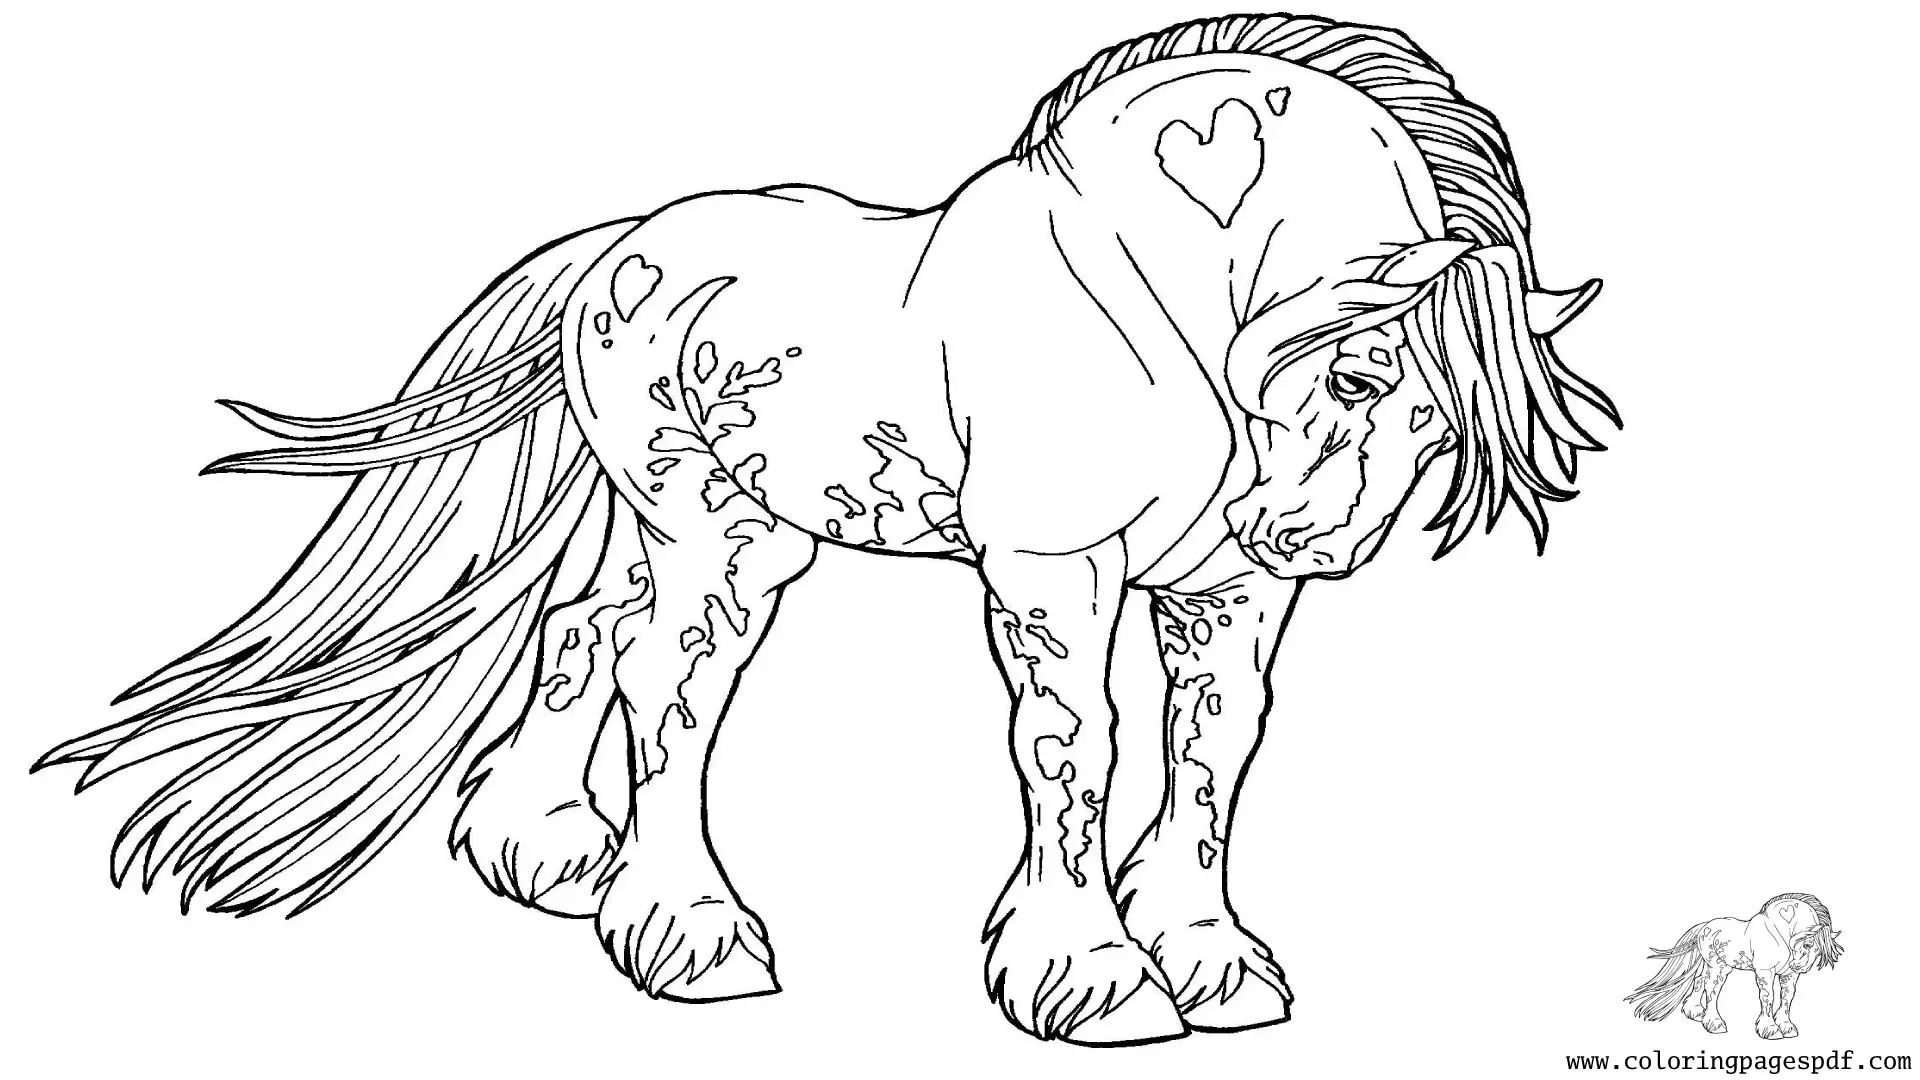 Coloring Page Of A Horse With Beautiful Hair